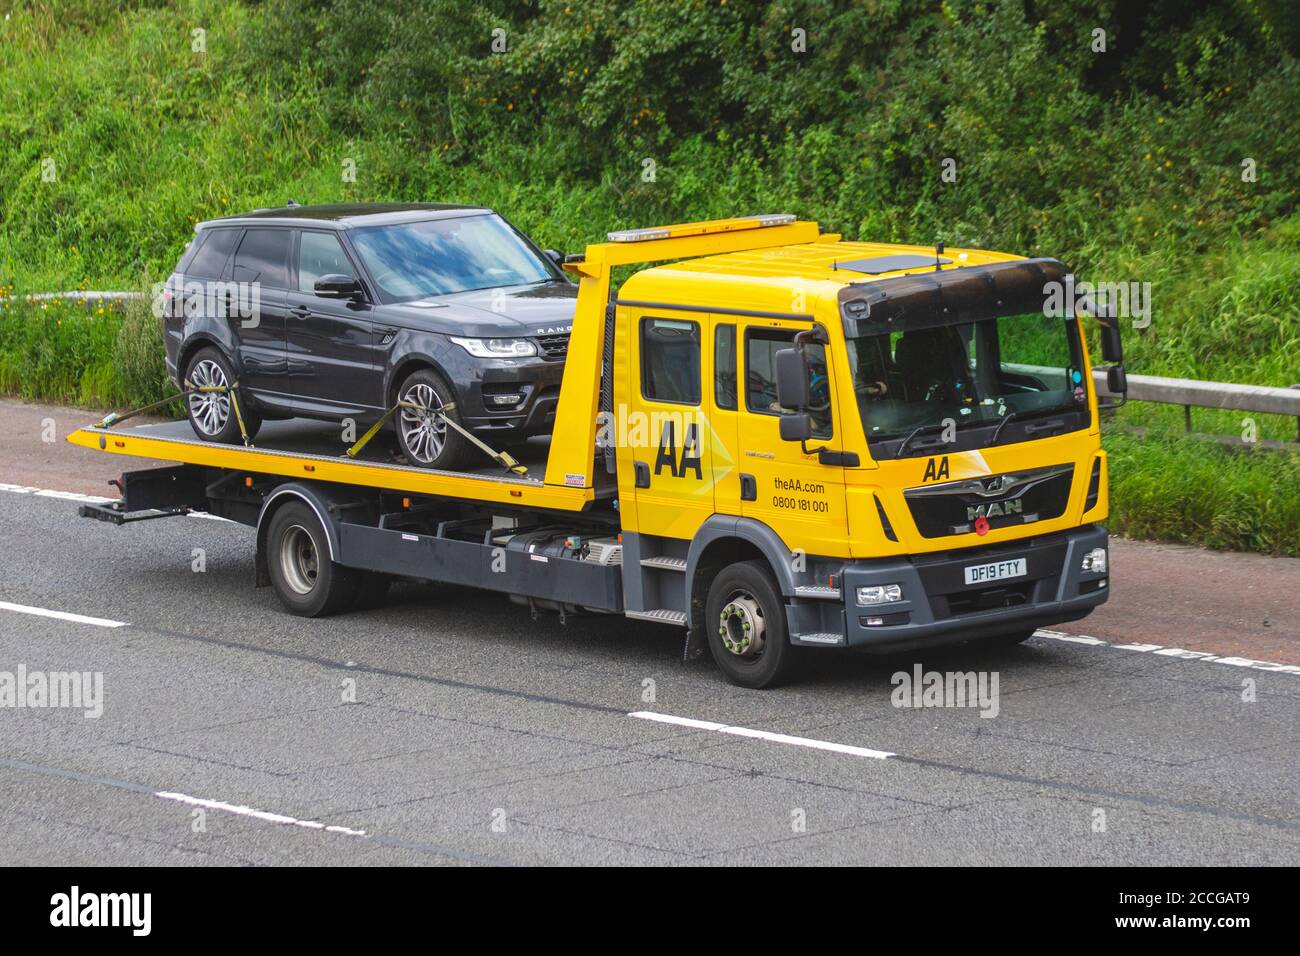 Range Rover on AA Flatbed truck; 24hr emergency breakdown rescue service vehicle; UK Vehicular traffic, transport, modern, saloon cars, south-bound on the 3 lane M6 motorway highway. Stock Photo